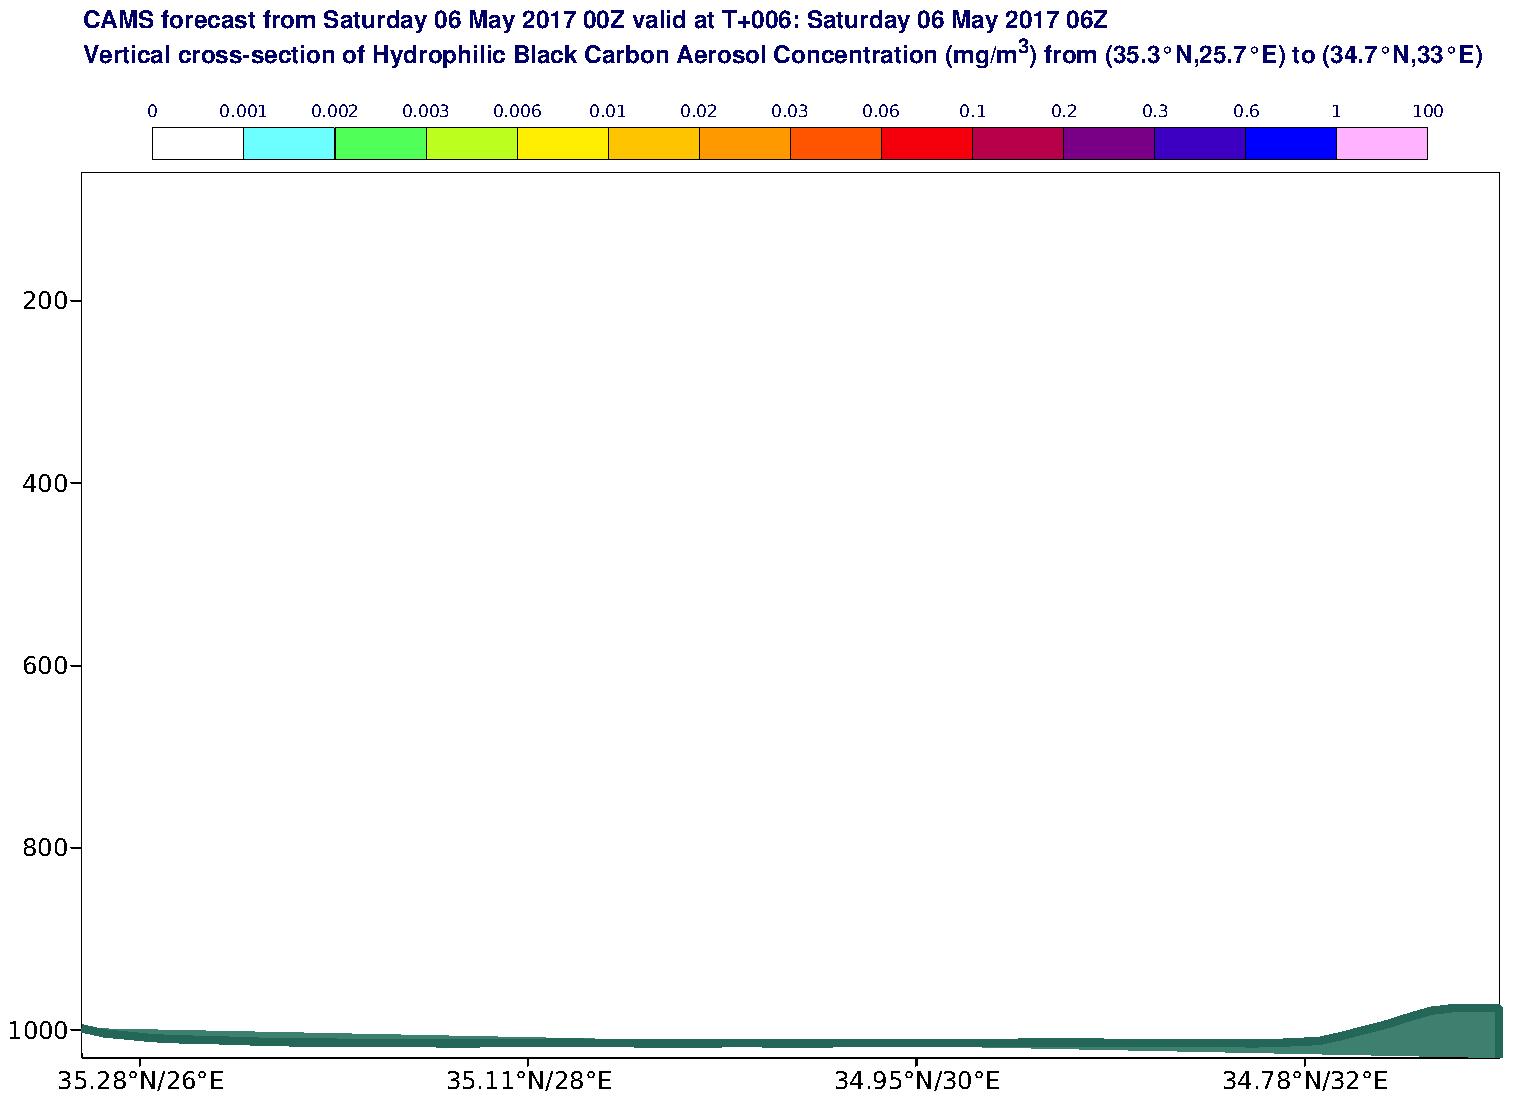 Vertical cross-section of Hydrophilic Black Carbon Aerosol Concentration (mg/m3) valid at T6 - 2017-05-06 06:00